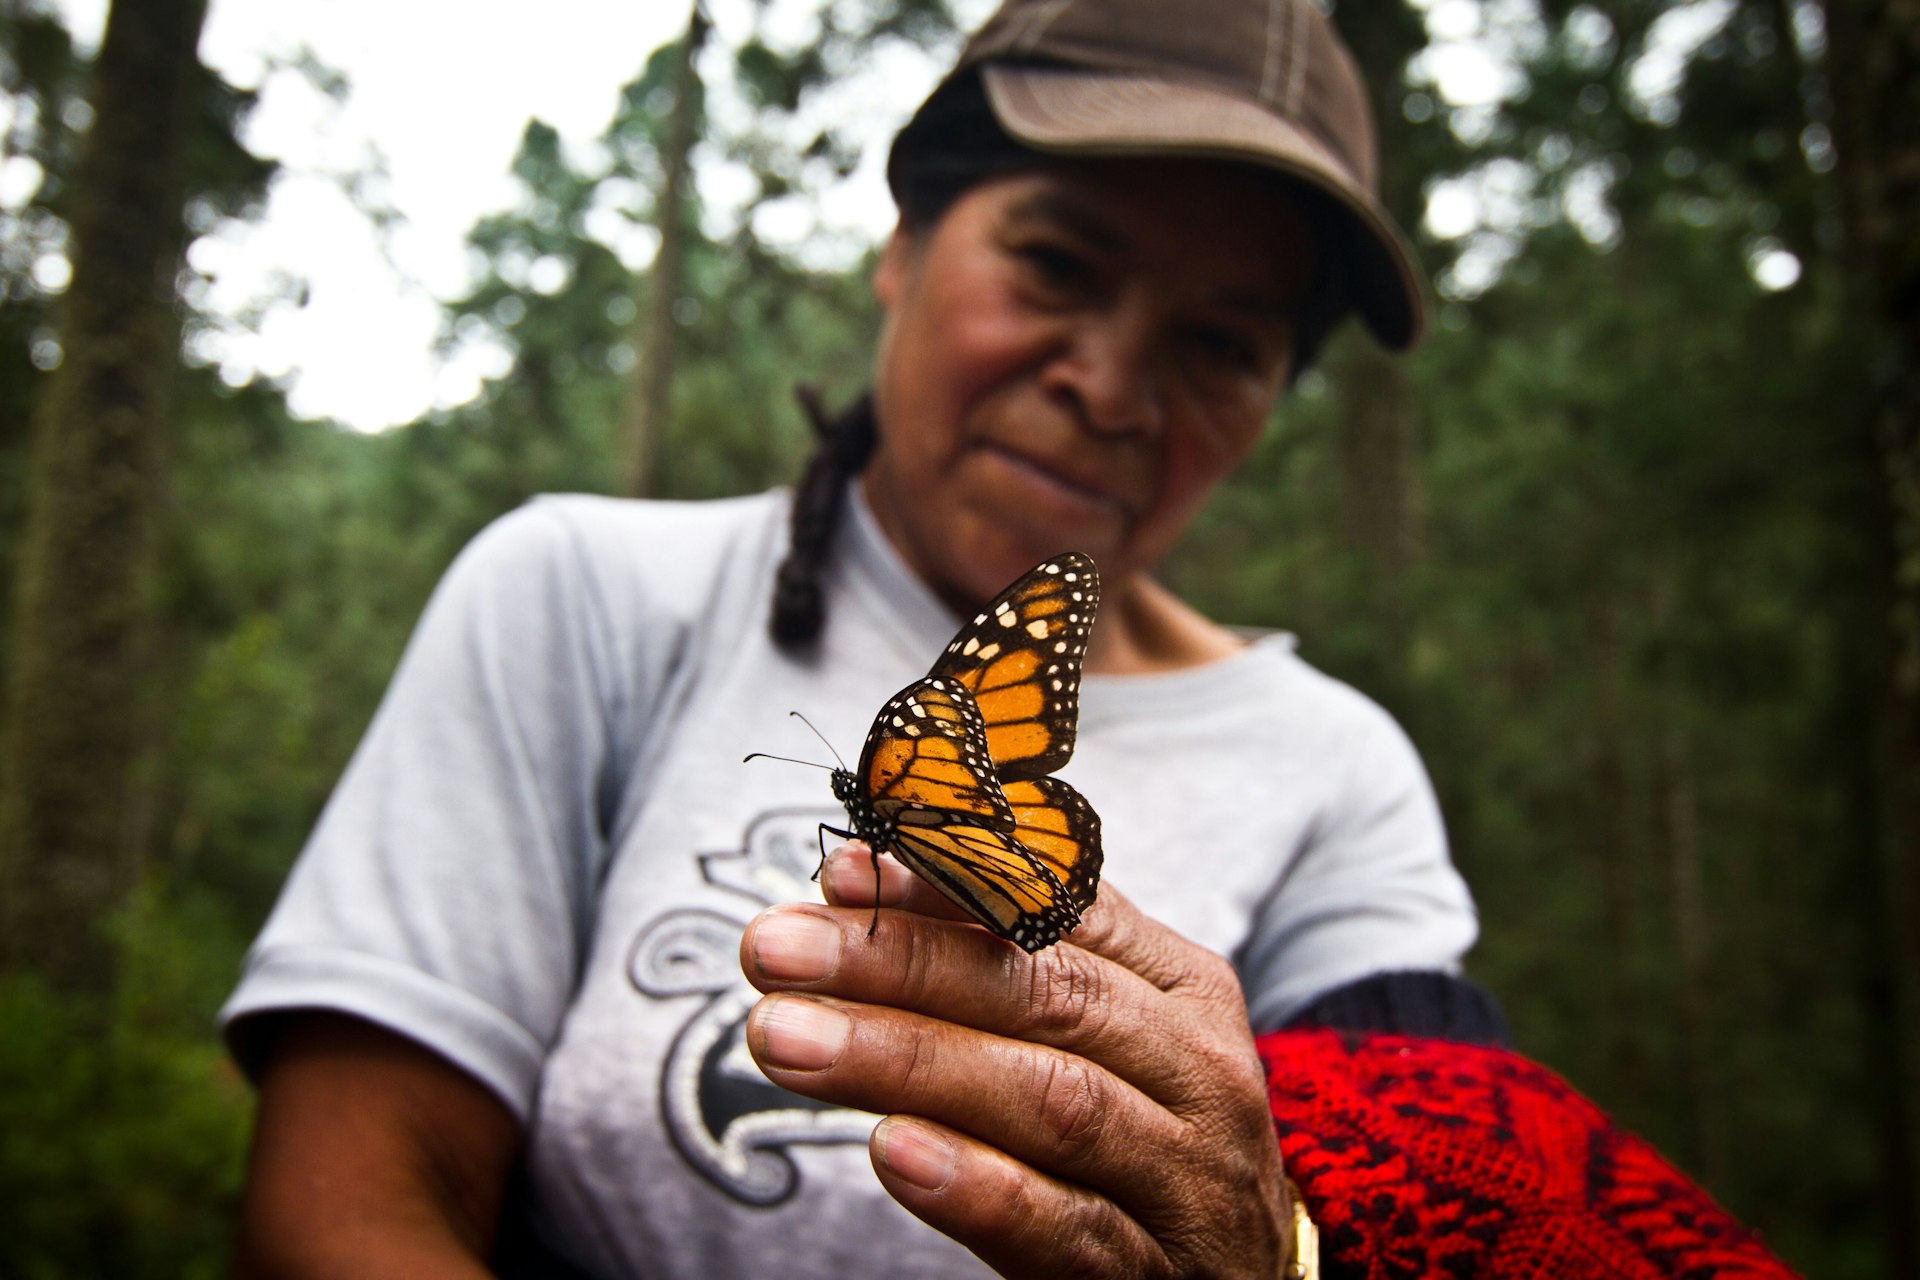 Visitors can get up close to the monarch butterflies at Mexico's butterfly sanctuaries. Image by Stuart Butler / Lonely Planet 